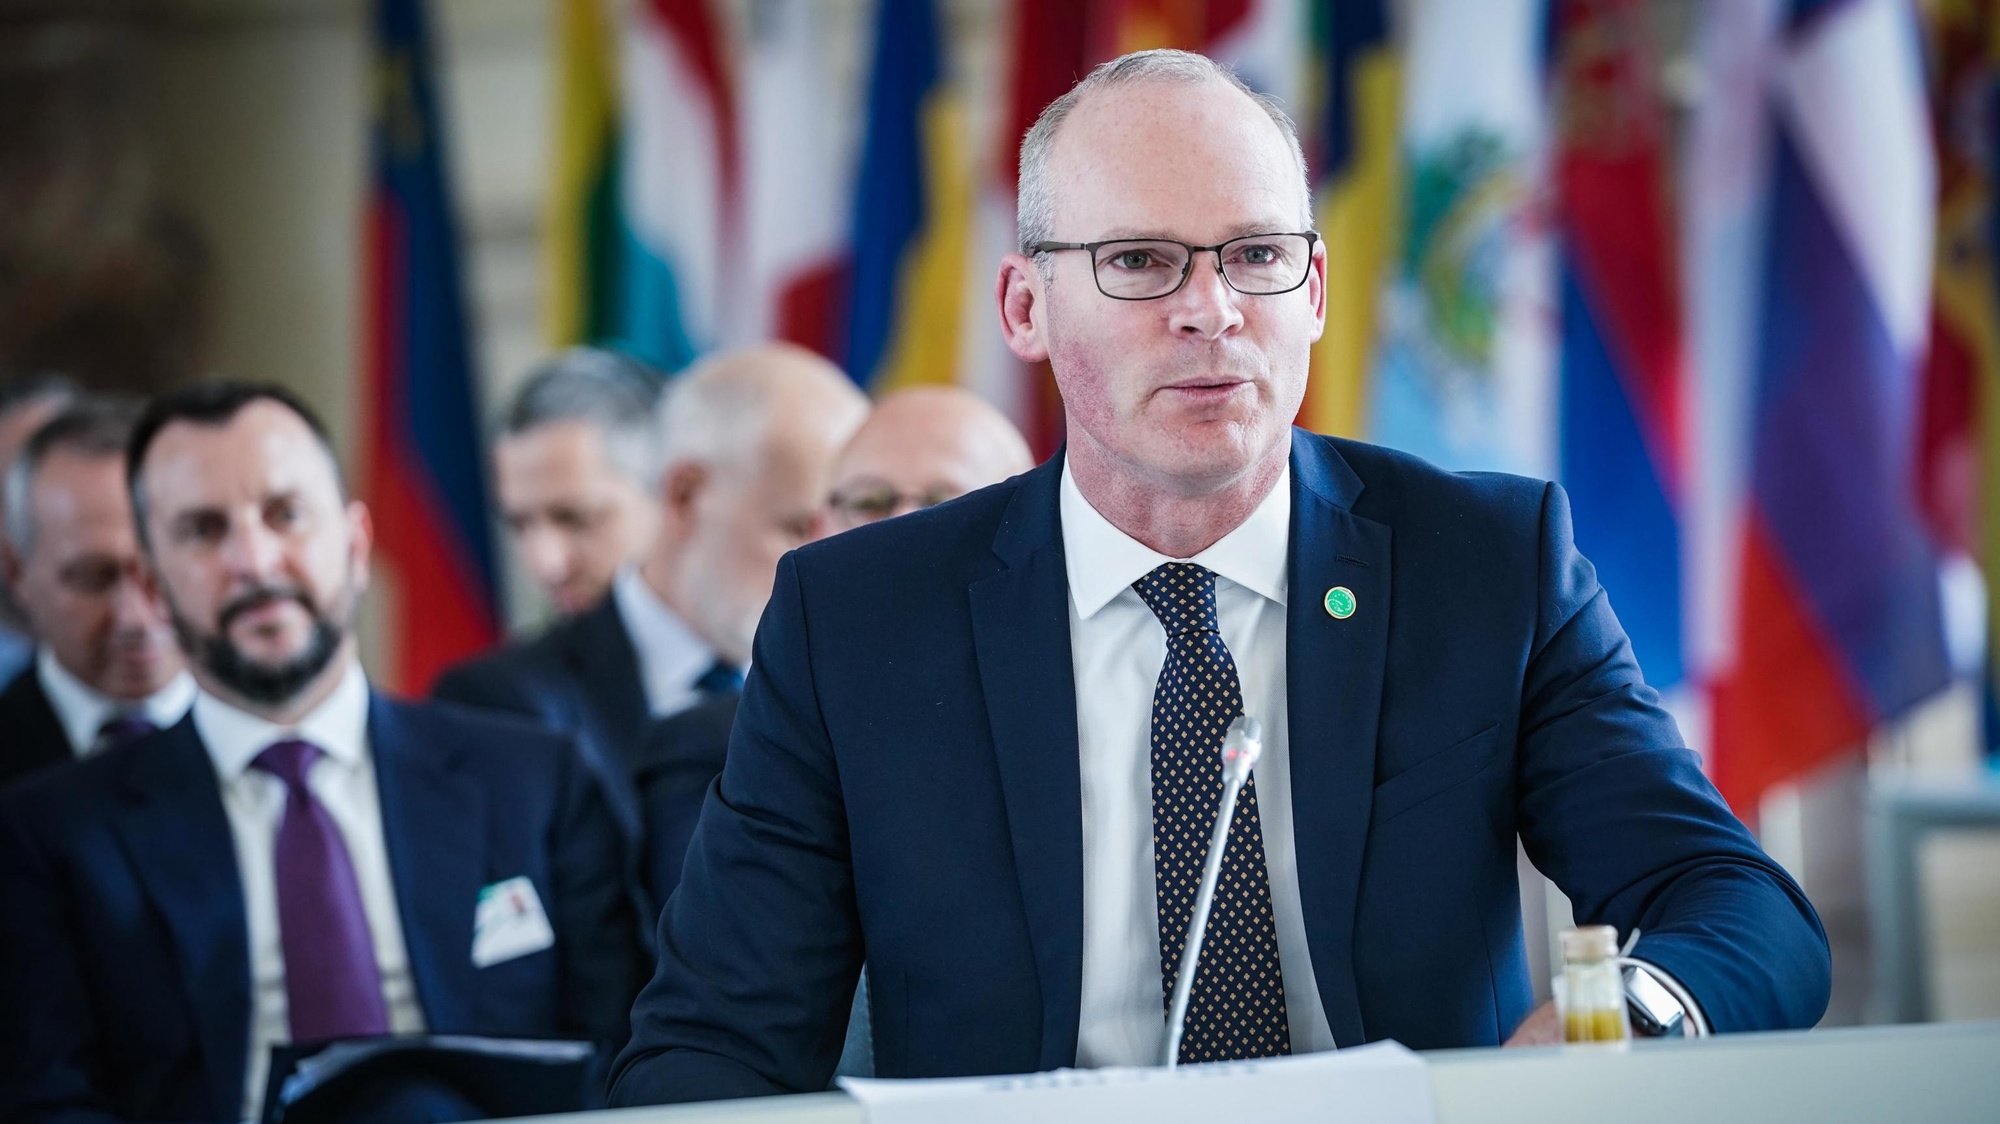 epa09960063 Irish Minister of Foreign Affairs Simon Coveney (R) speaks during the 132nd session of the Committee of Foreign Ministers of the Council of Europe at the Reggia di Venaria Reale in Turin, Italy, 20 May 2022.  EPA/Tino Romano